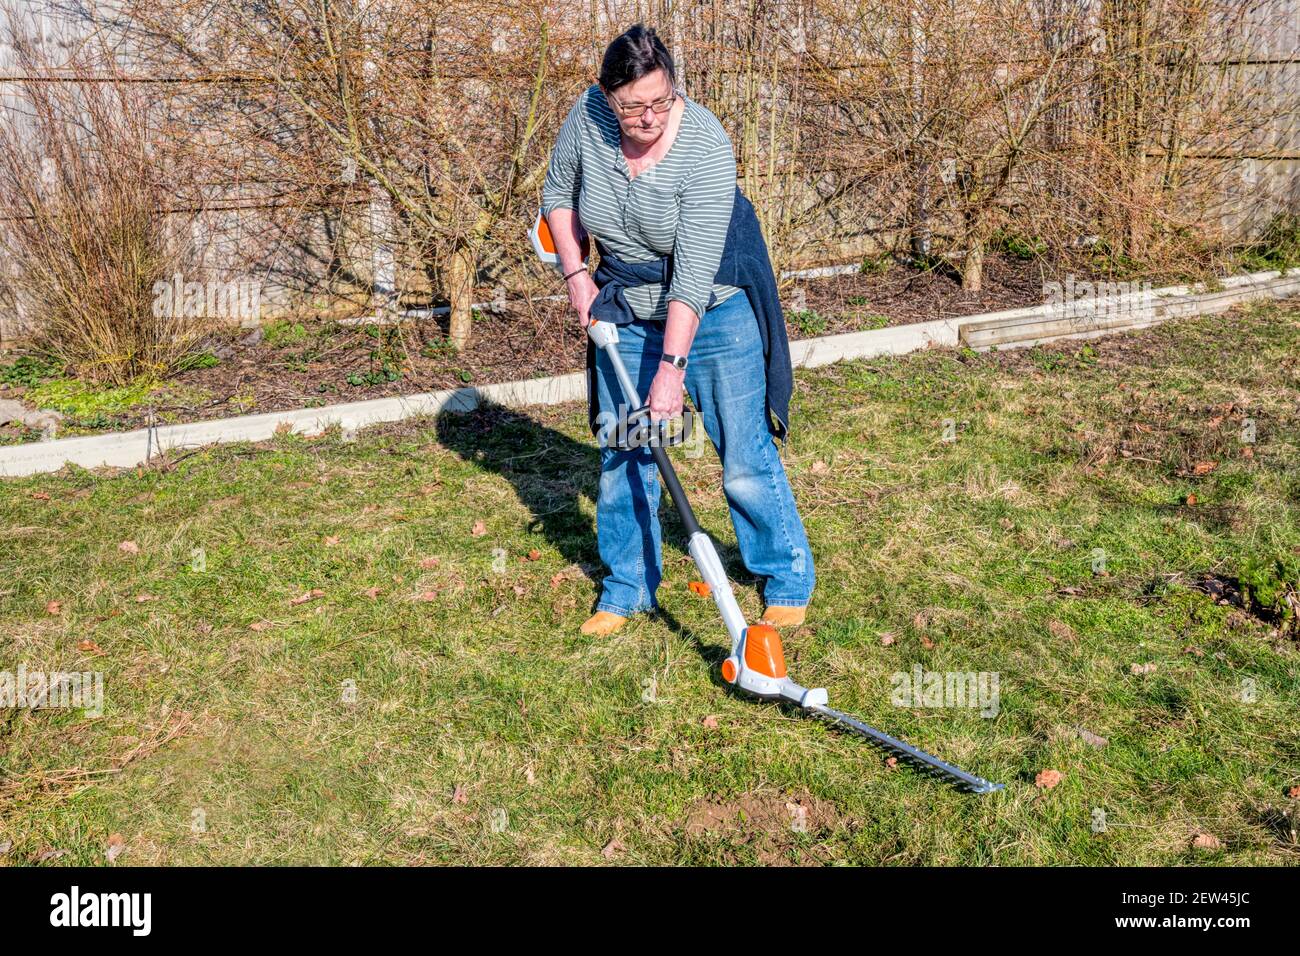 Woman clearing area of rough grassland or meadow using a hedge trimmer. Stock Photo